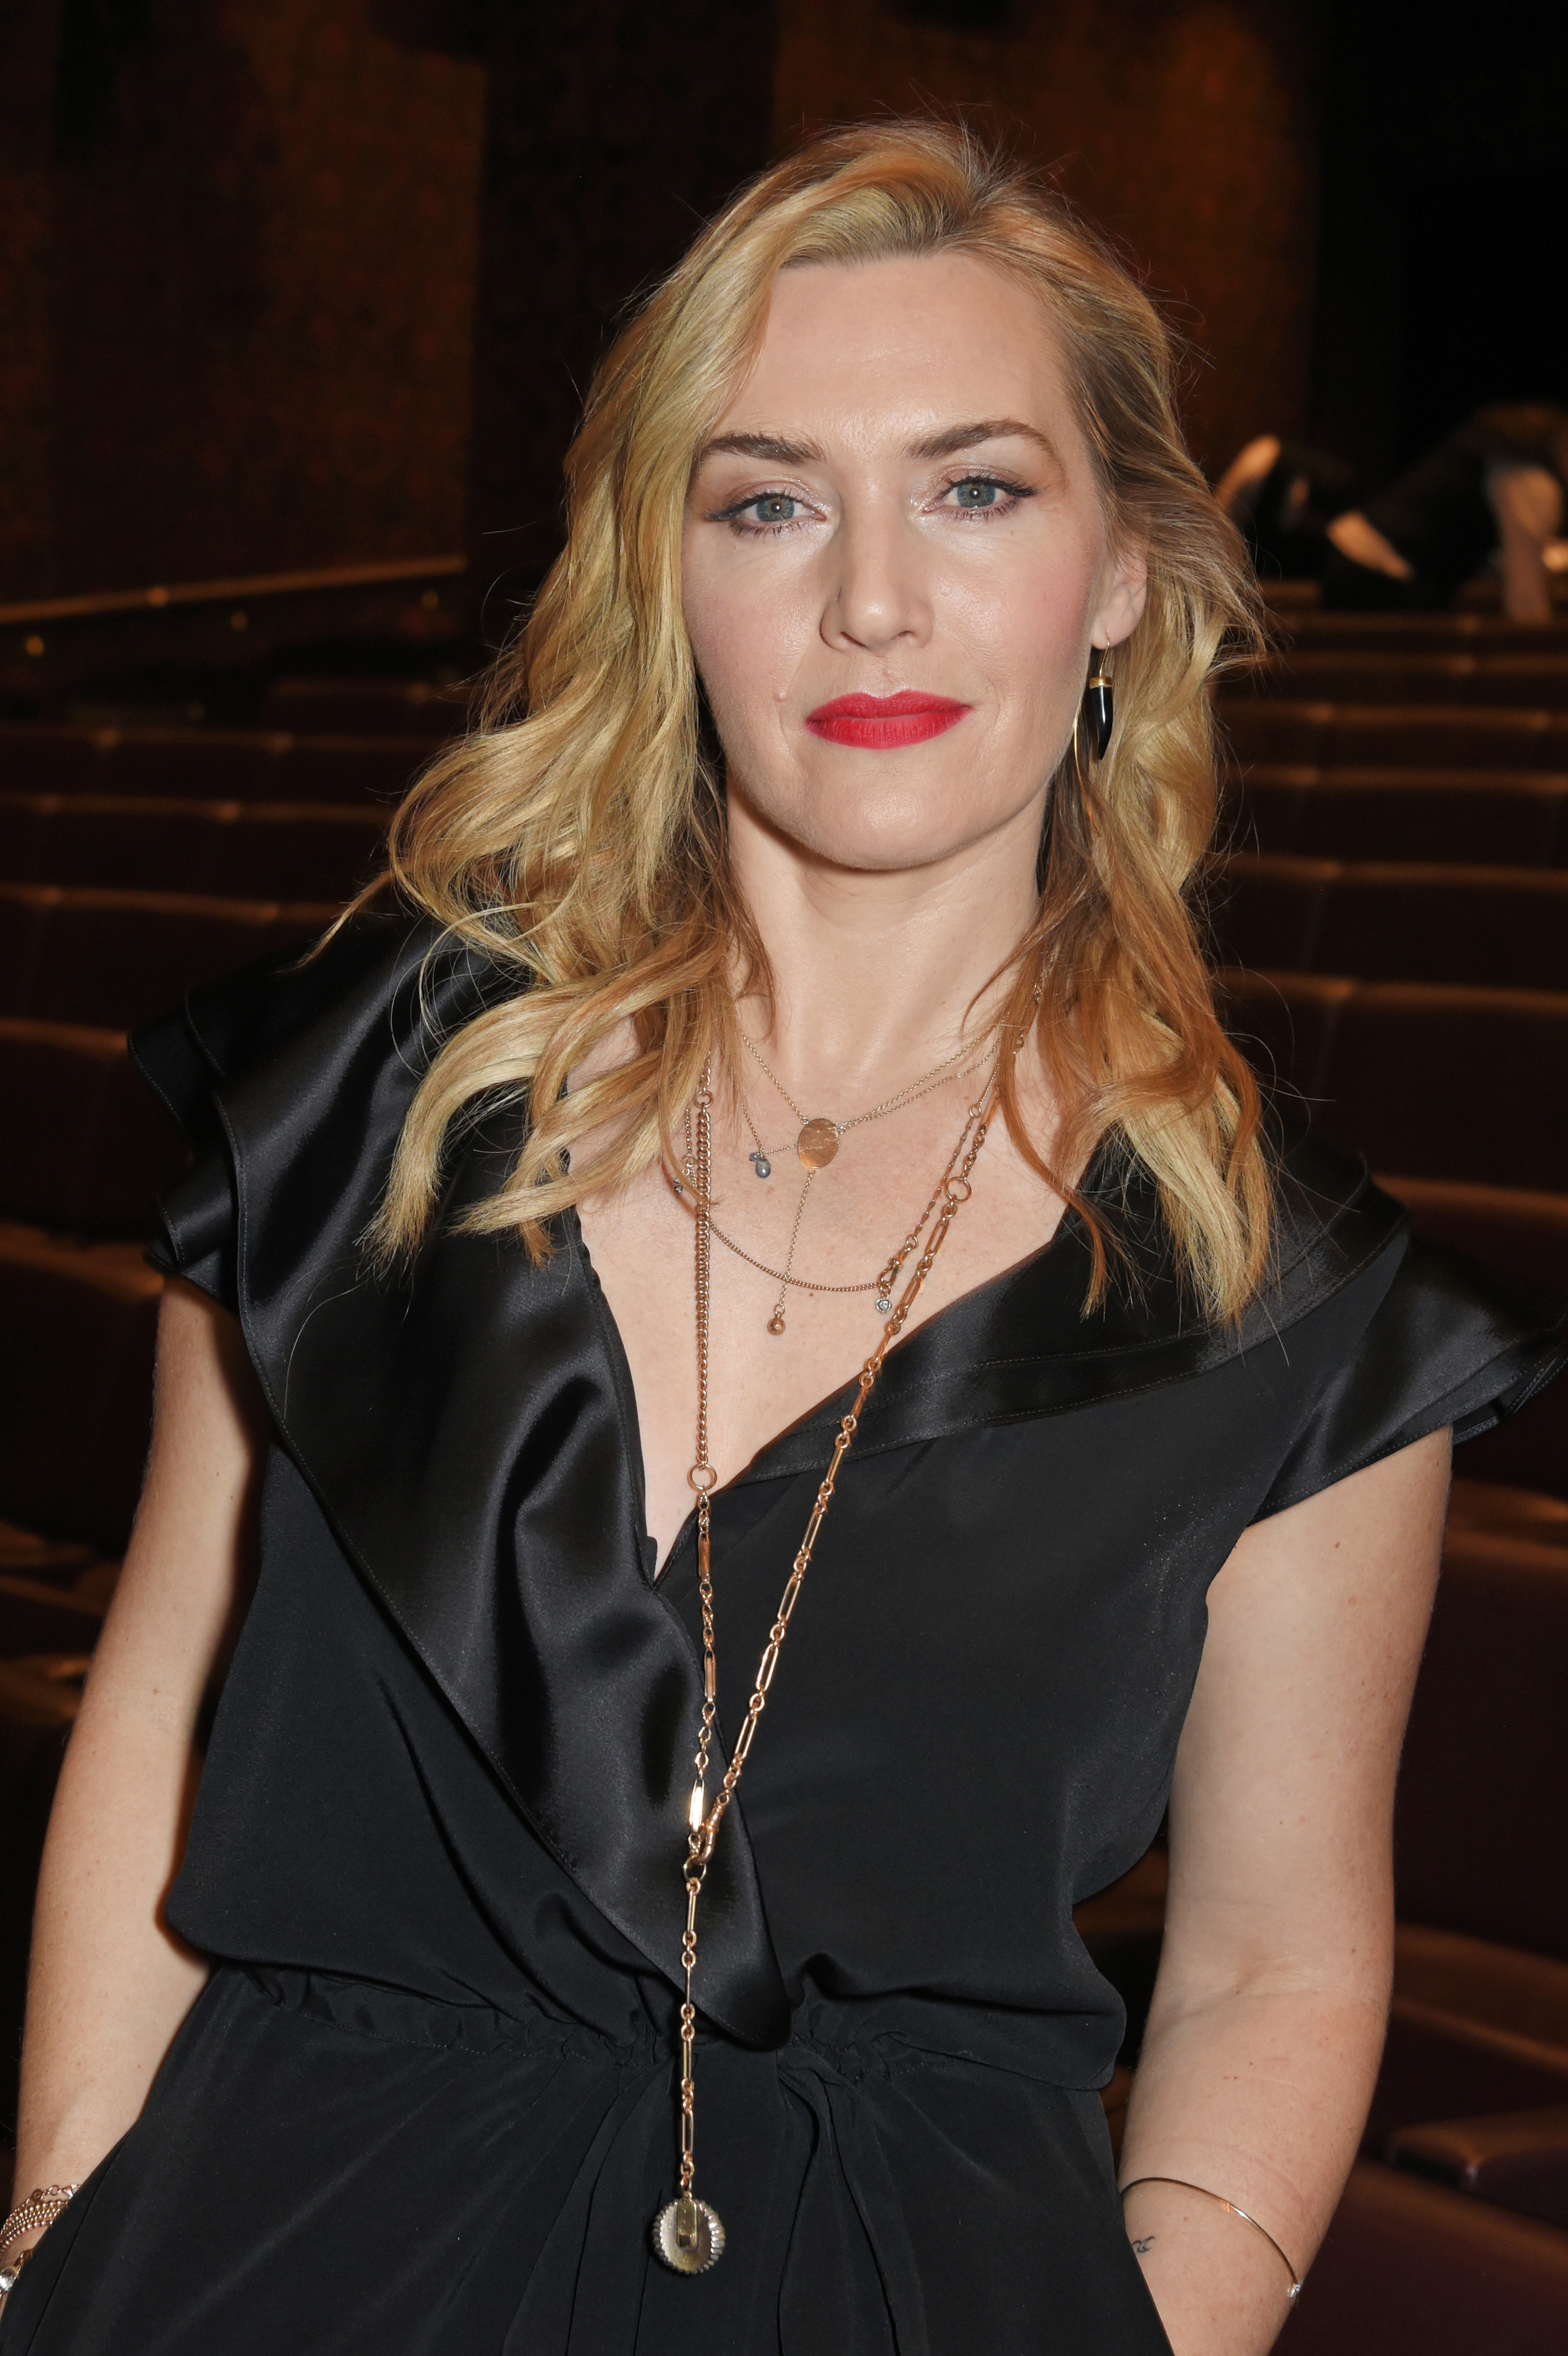 Winslet at the London Film Critics Circle Awards in 2018